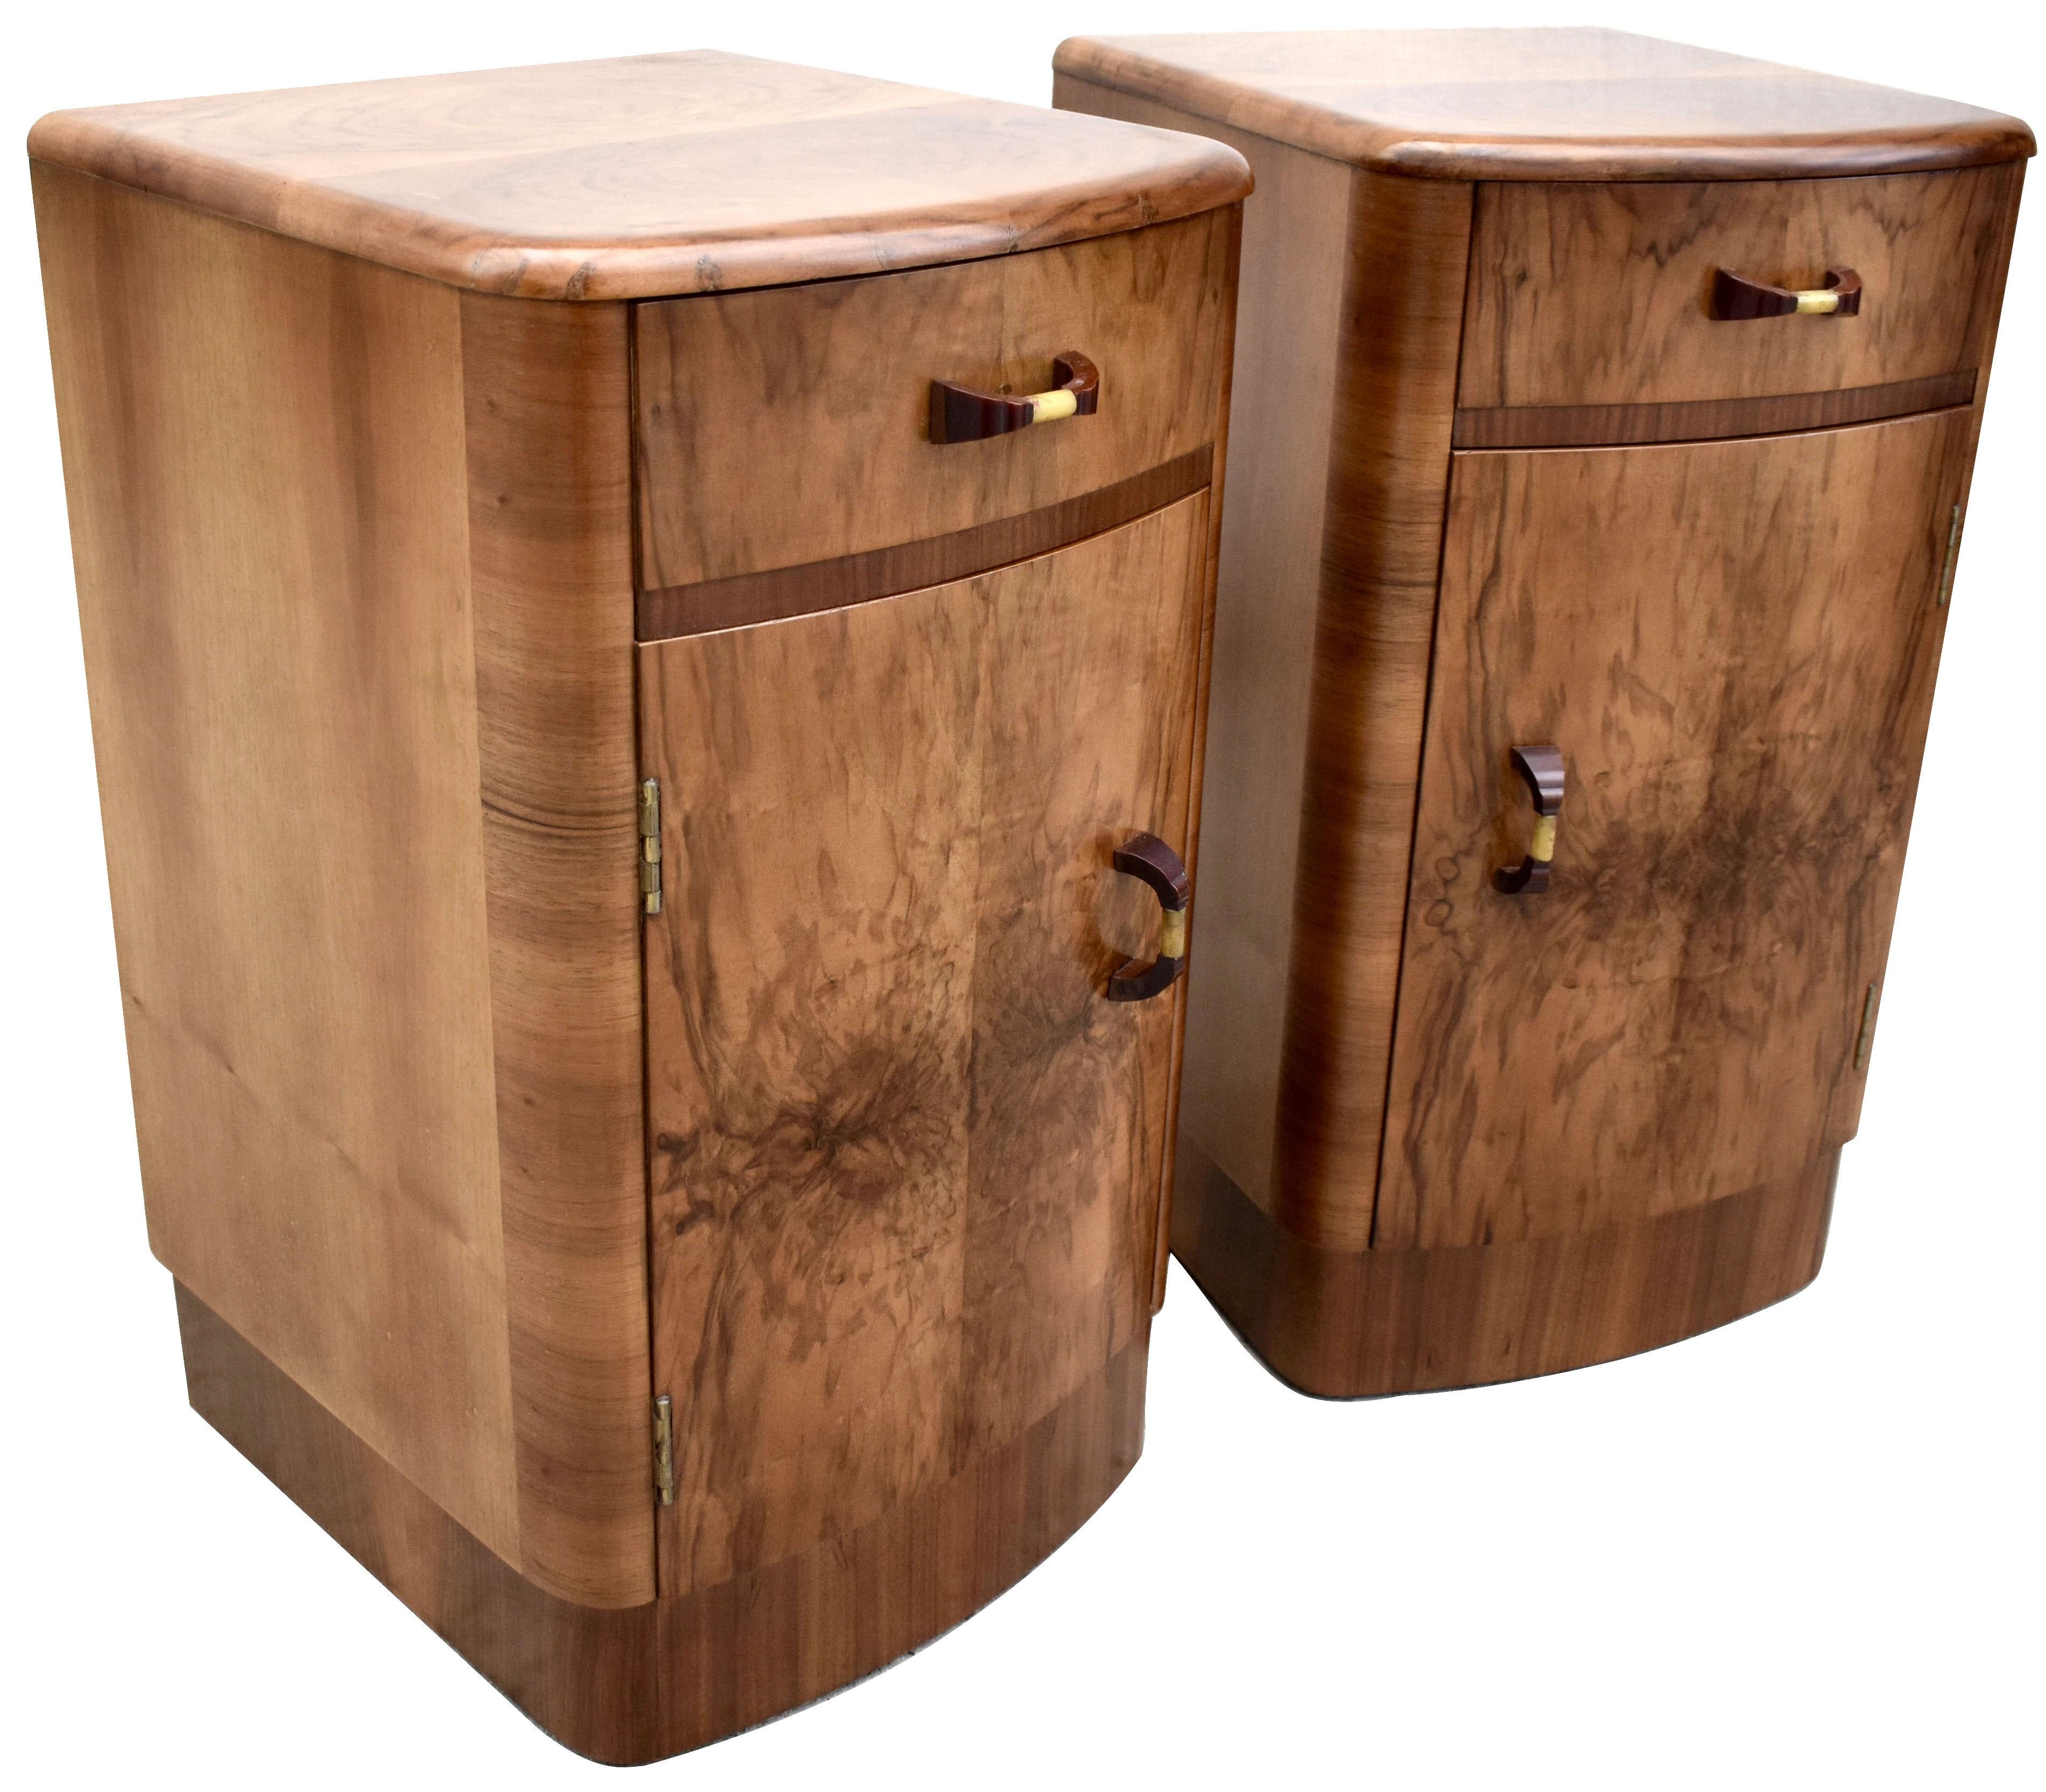 Fabulous pair of matching 1930s Art Deco bedside tables in heavily figured walnut veneer. Two generously sized internal storage areas. Each cabinet has a pullout / pull-out upper drawer which slides out effortlessly. We've had both cabinets fully